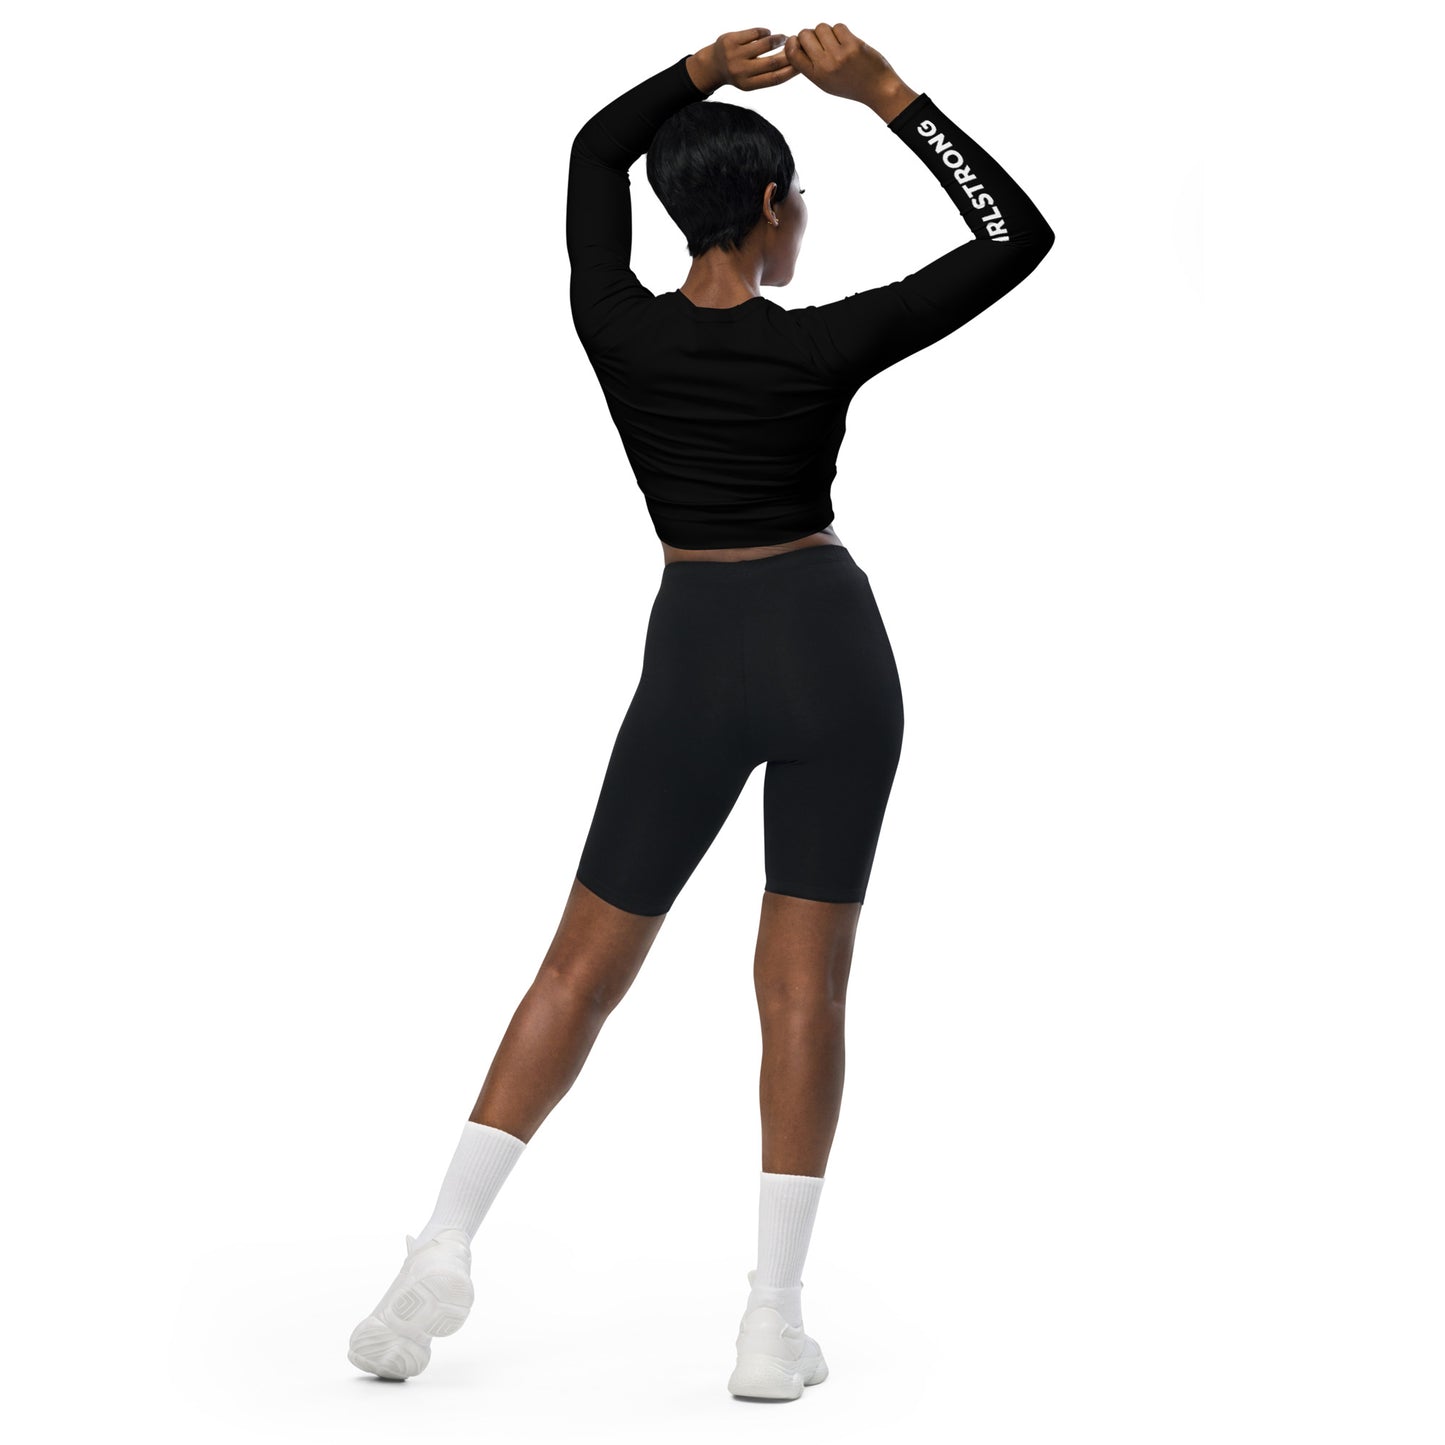 THE ESSENTIAL LONG SLEEVE FITTED CROP TOP BLACK